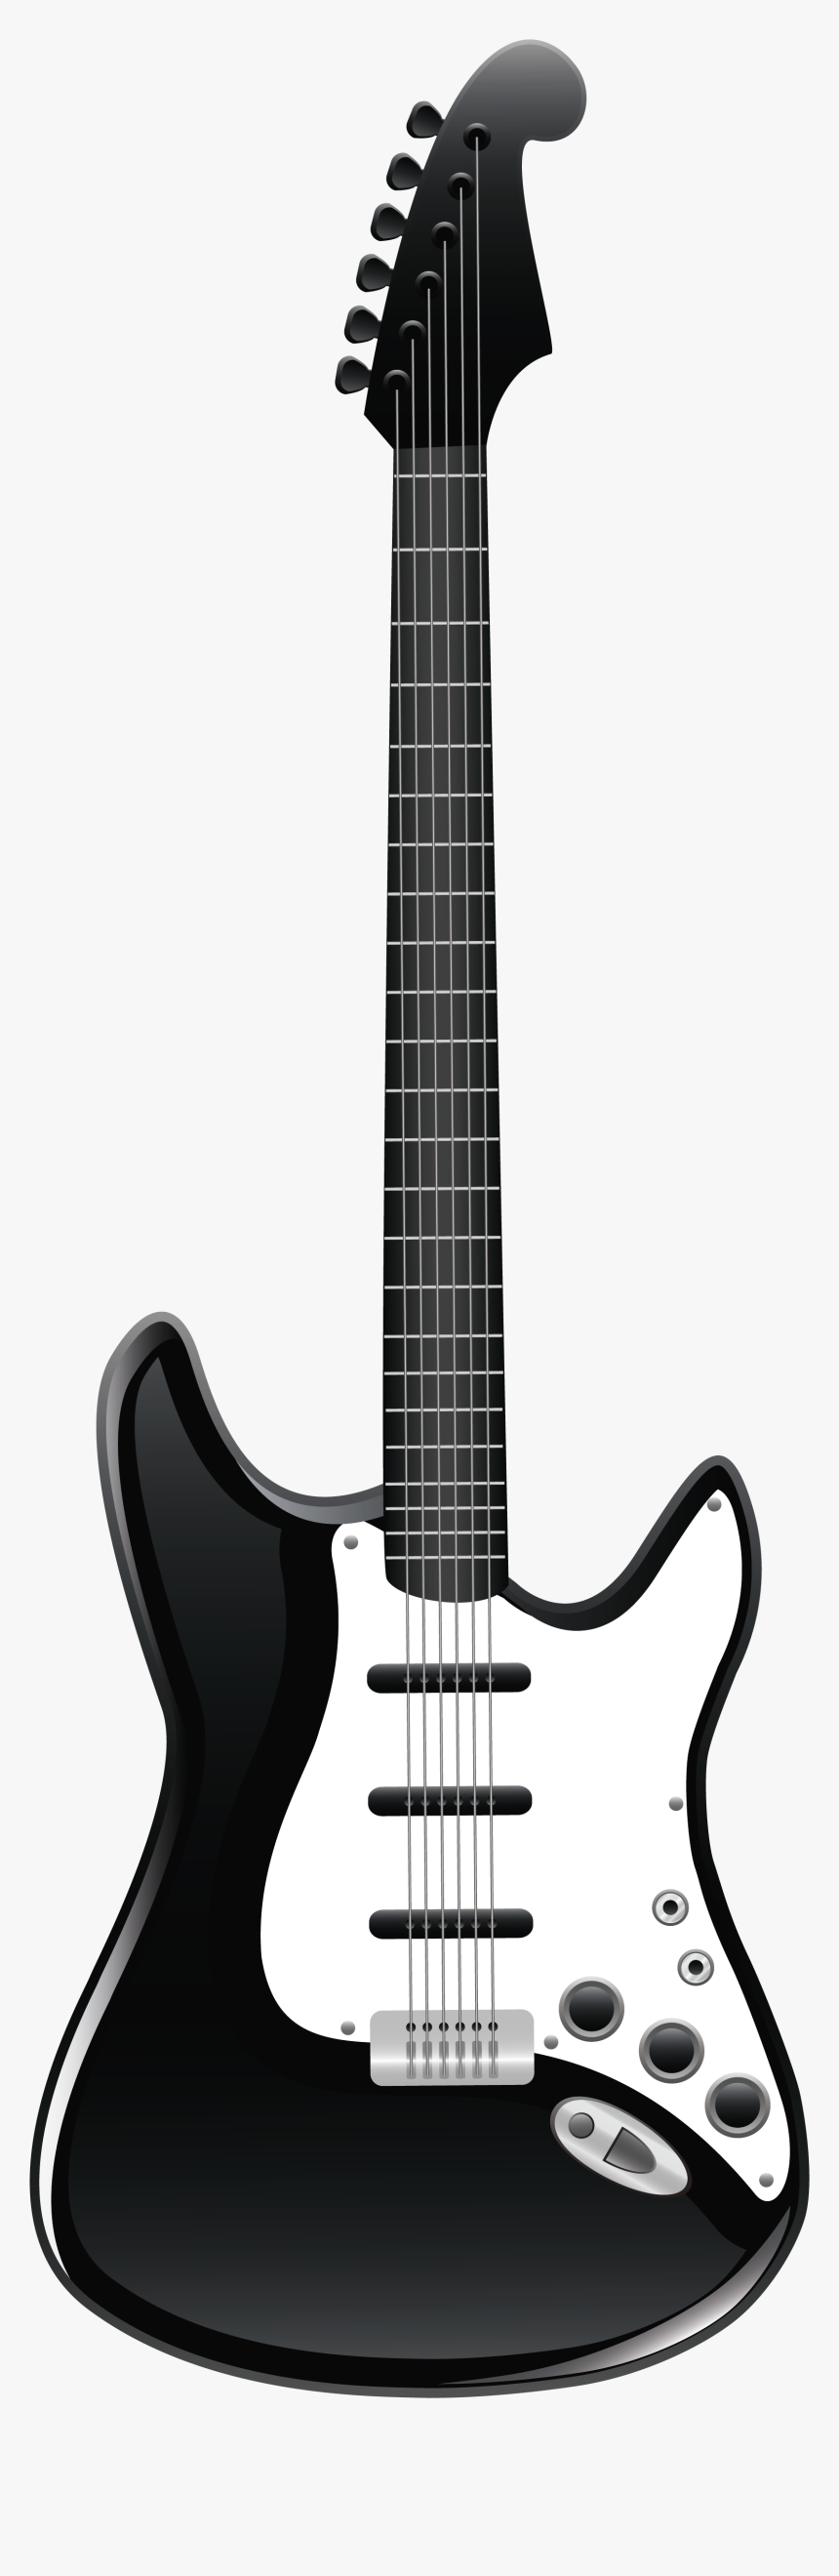 Guitar Clipart Black And White - Guitars Png, Transparent Png, Free Download